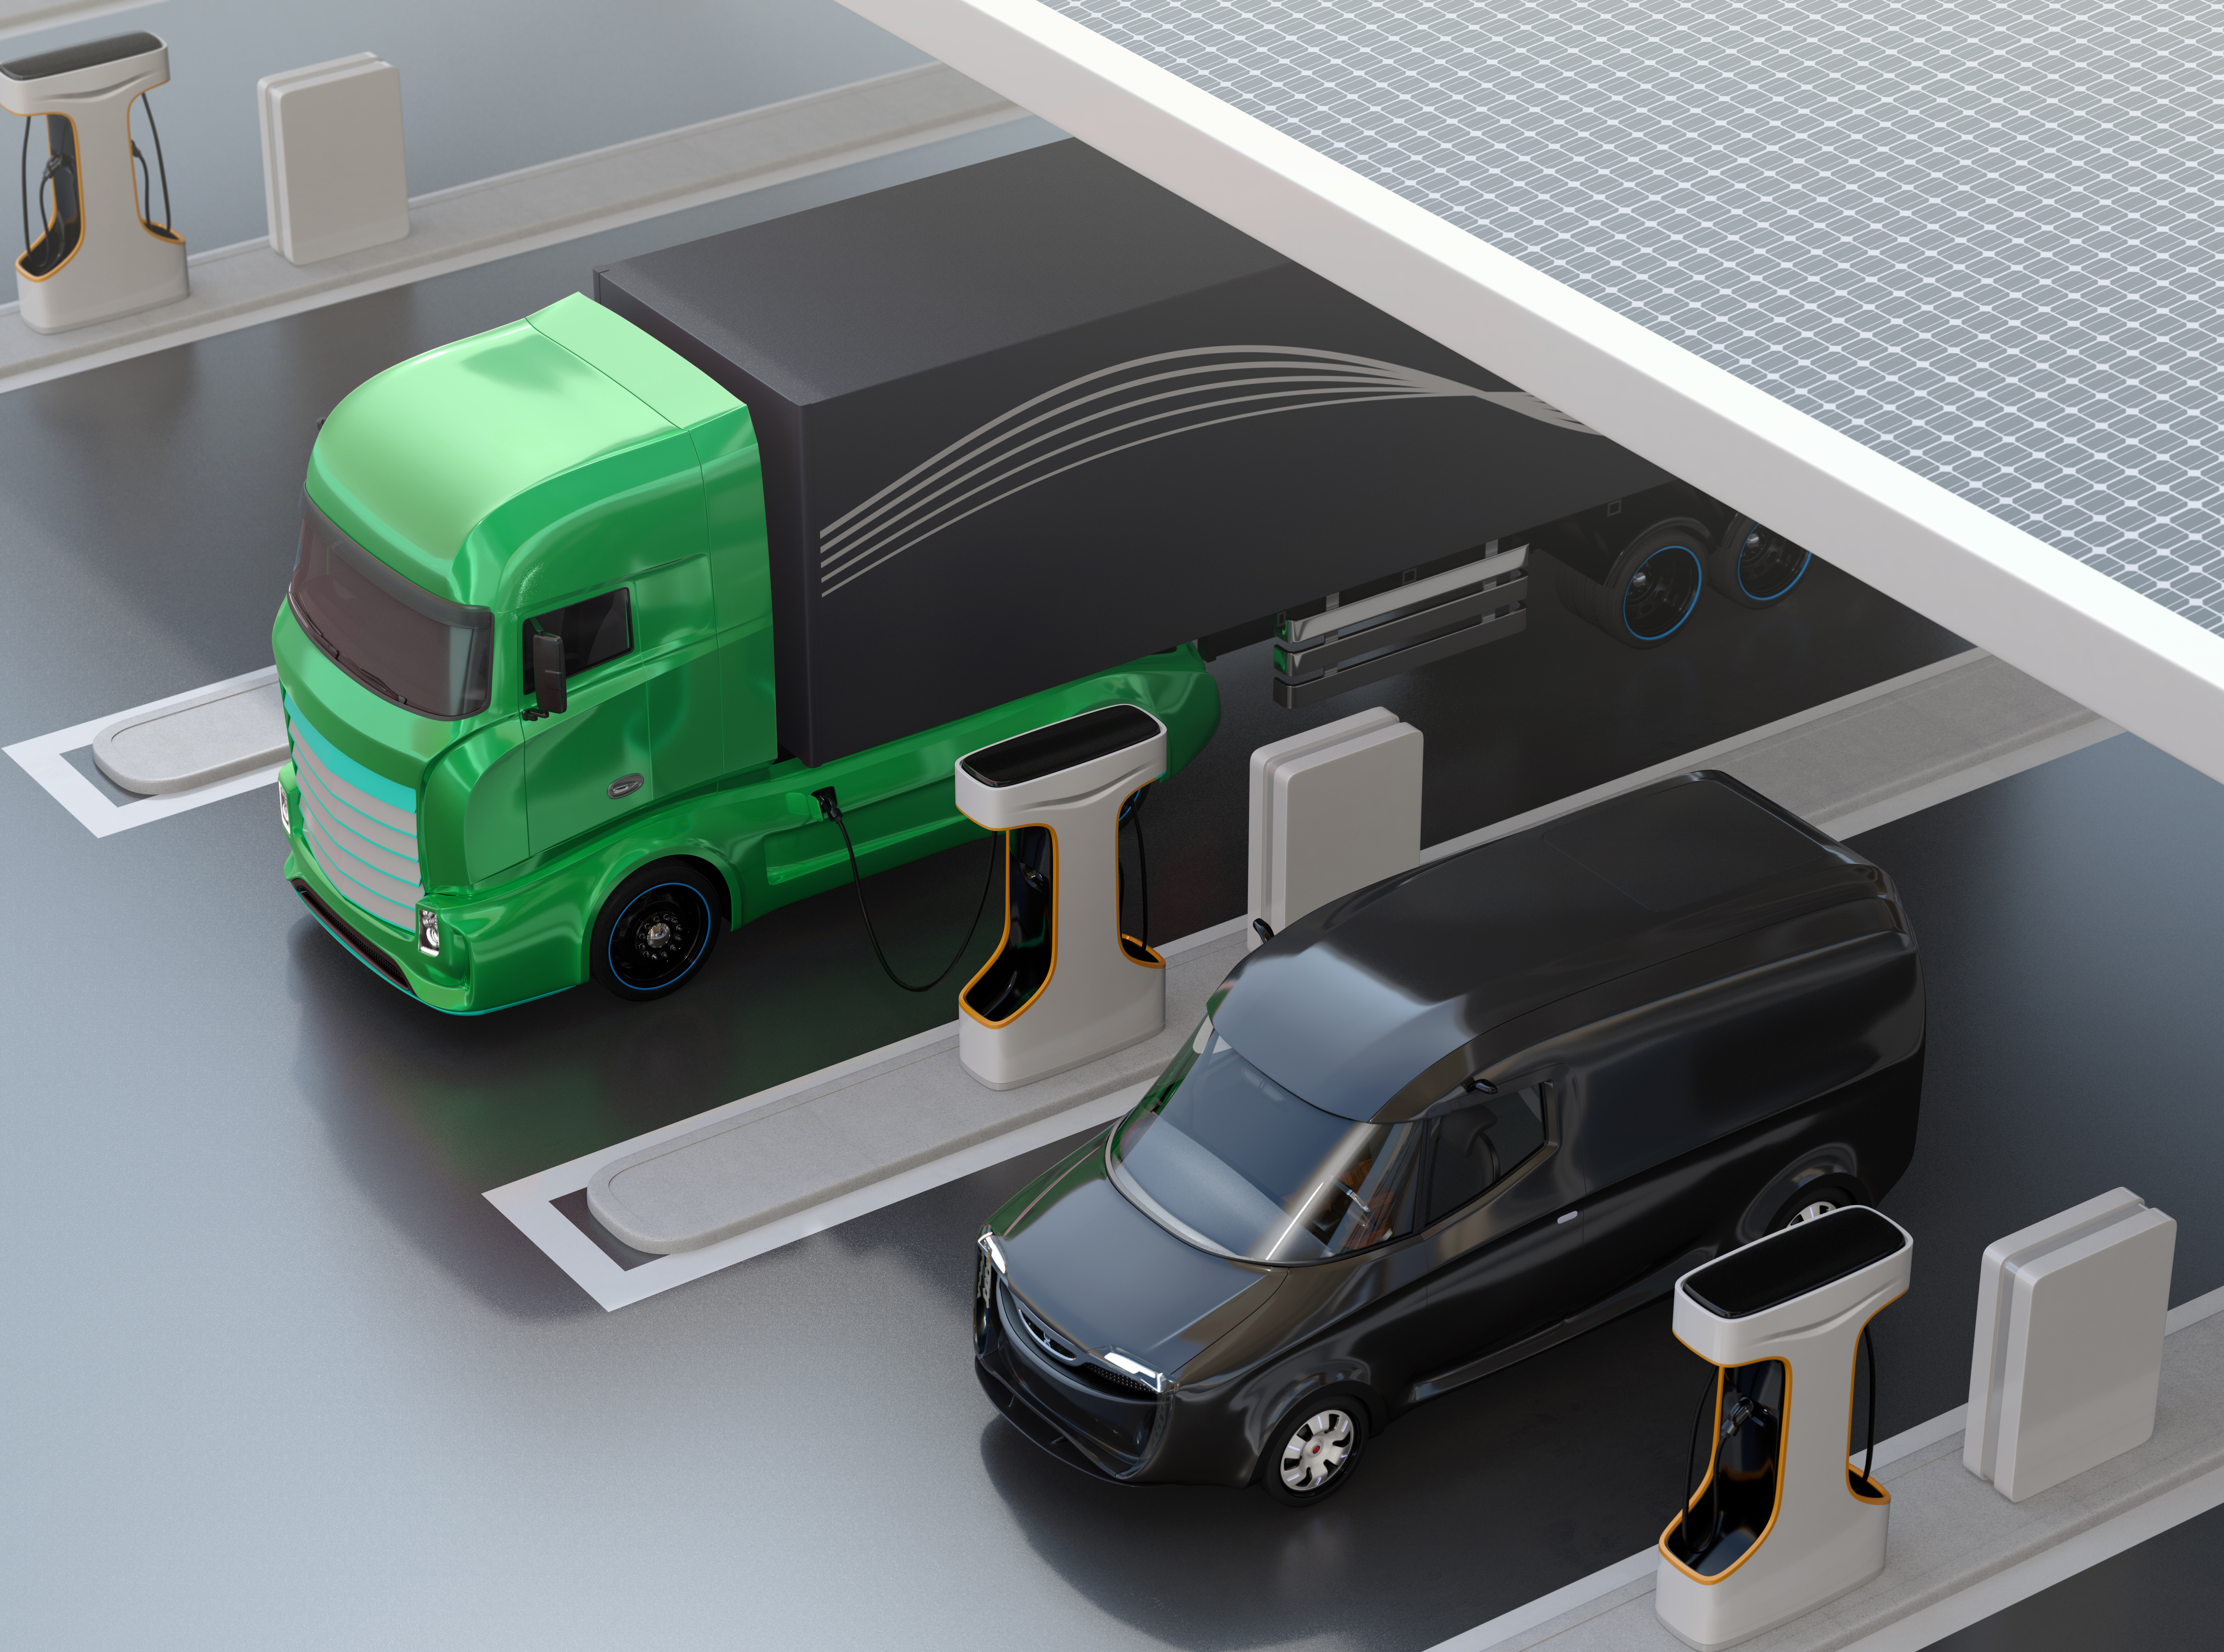 News - Electromobility: MEDUSA Ultra-fast charging for heavy duty vehicles  - AIT Austrian Institute Of Technology